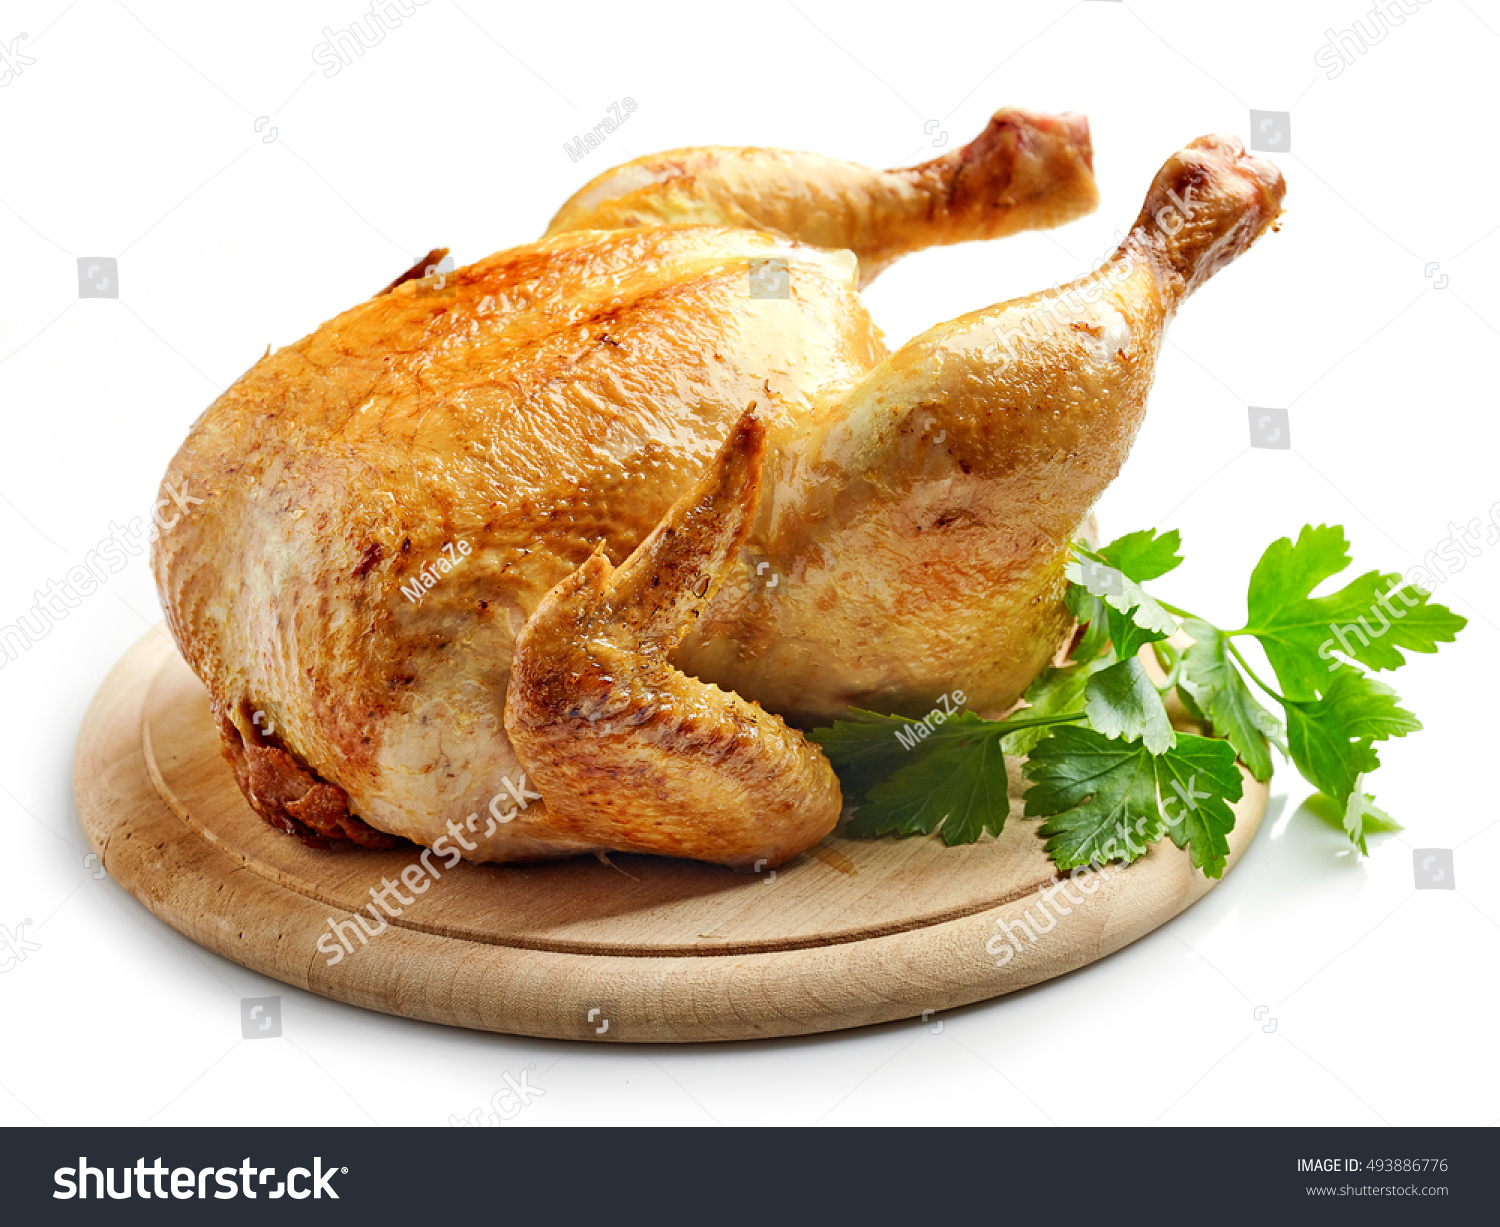 whole roasted chicken on wooden cutting board #493886776